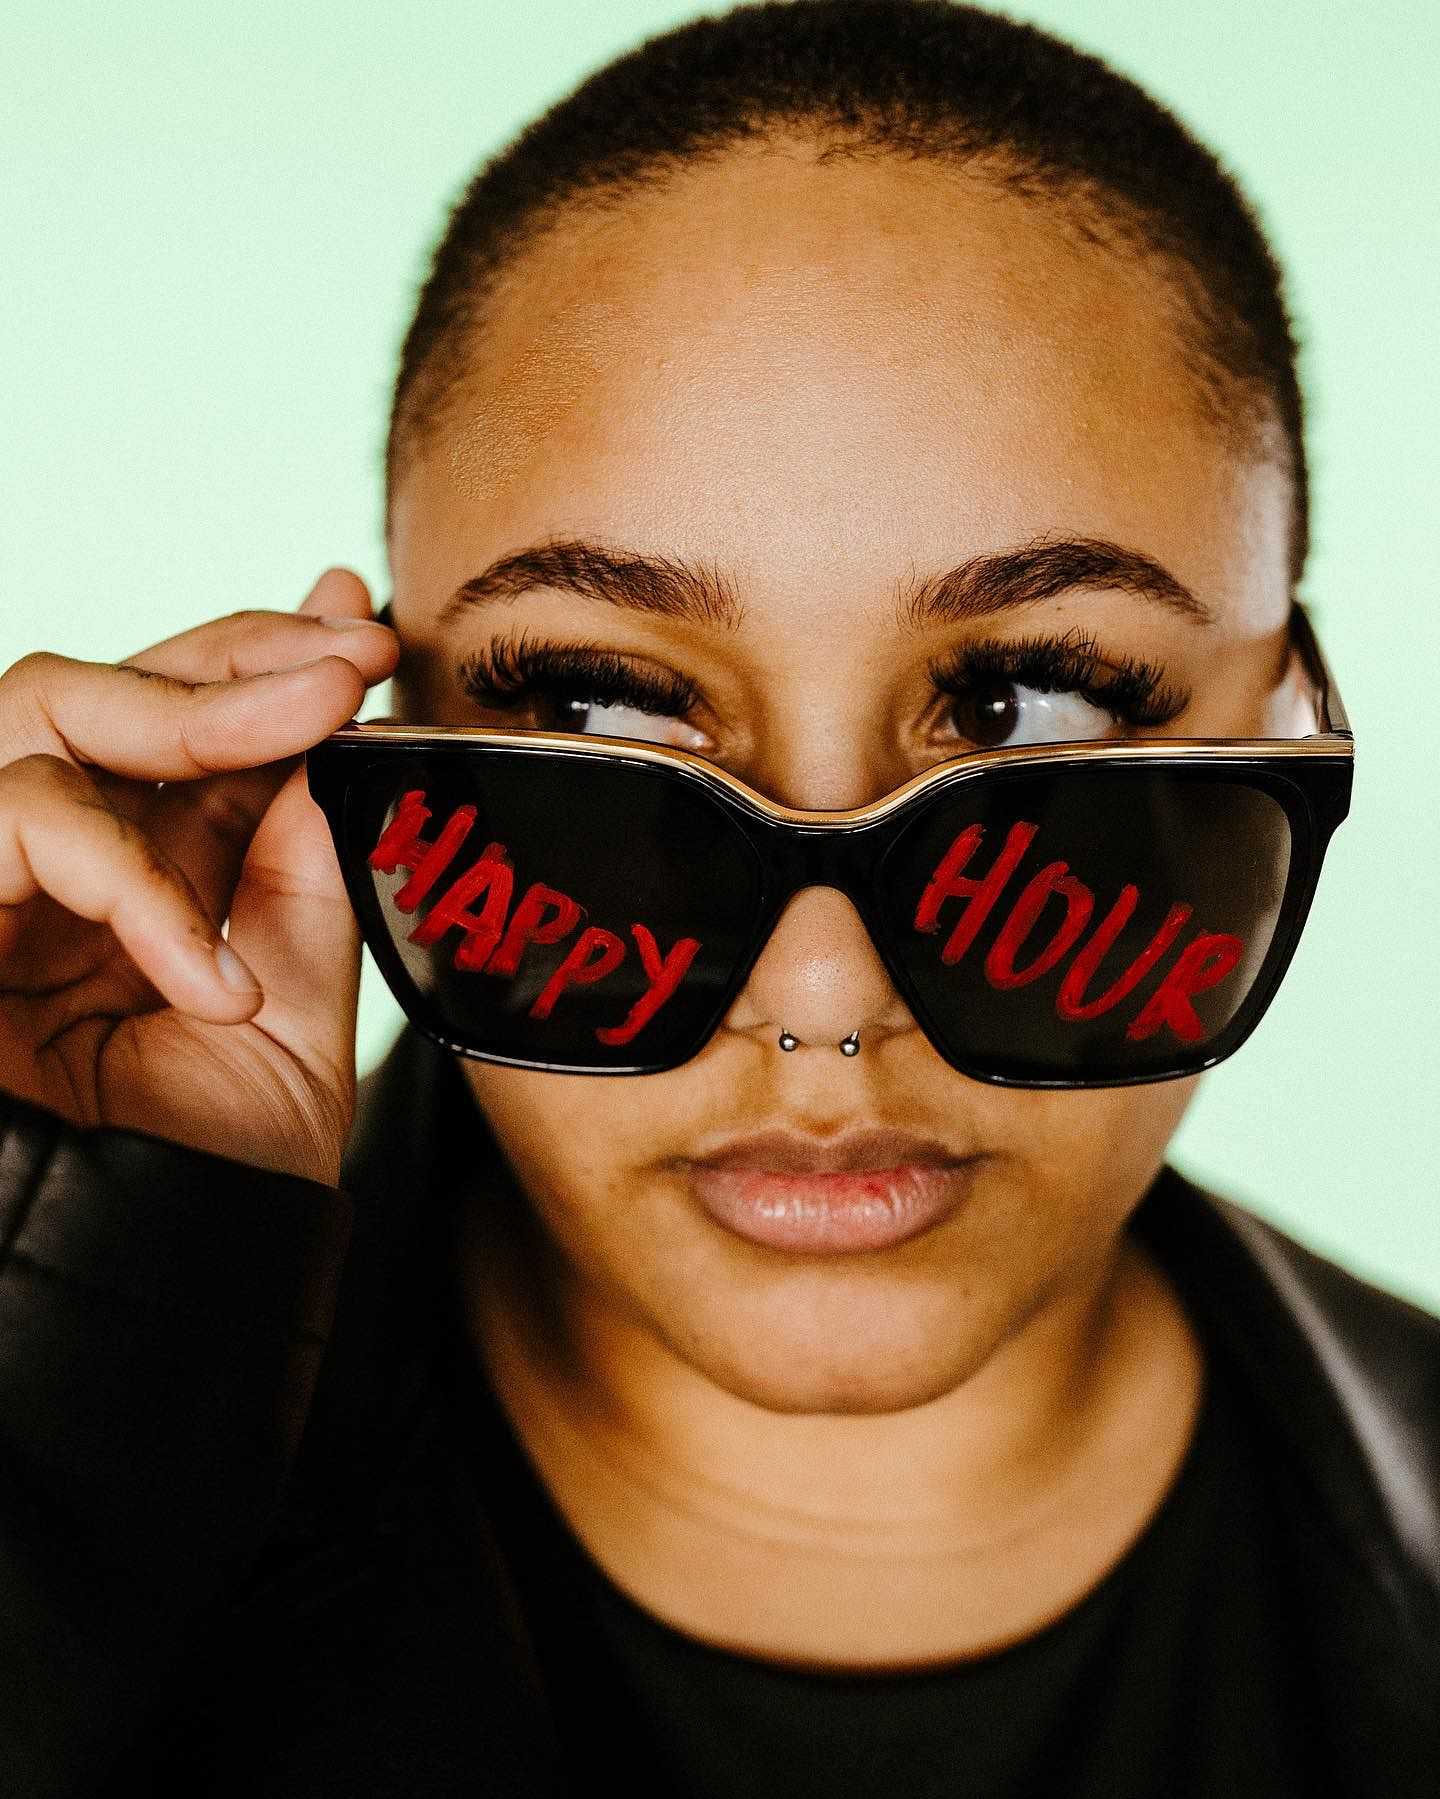 Woman wearing sunglasses with "Happy Hour" text on them.